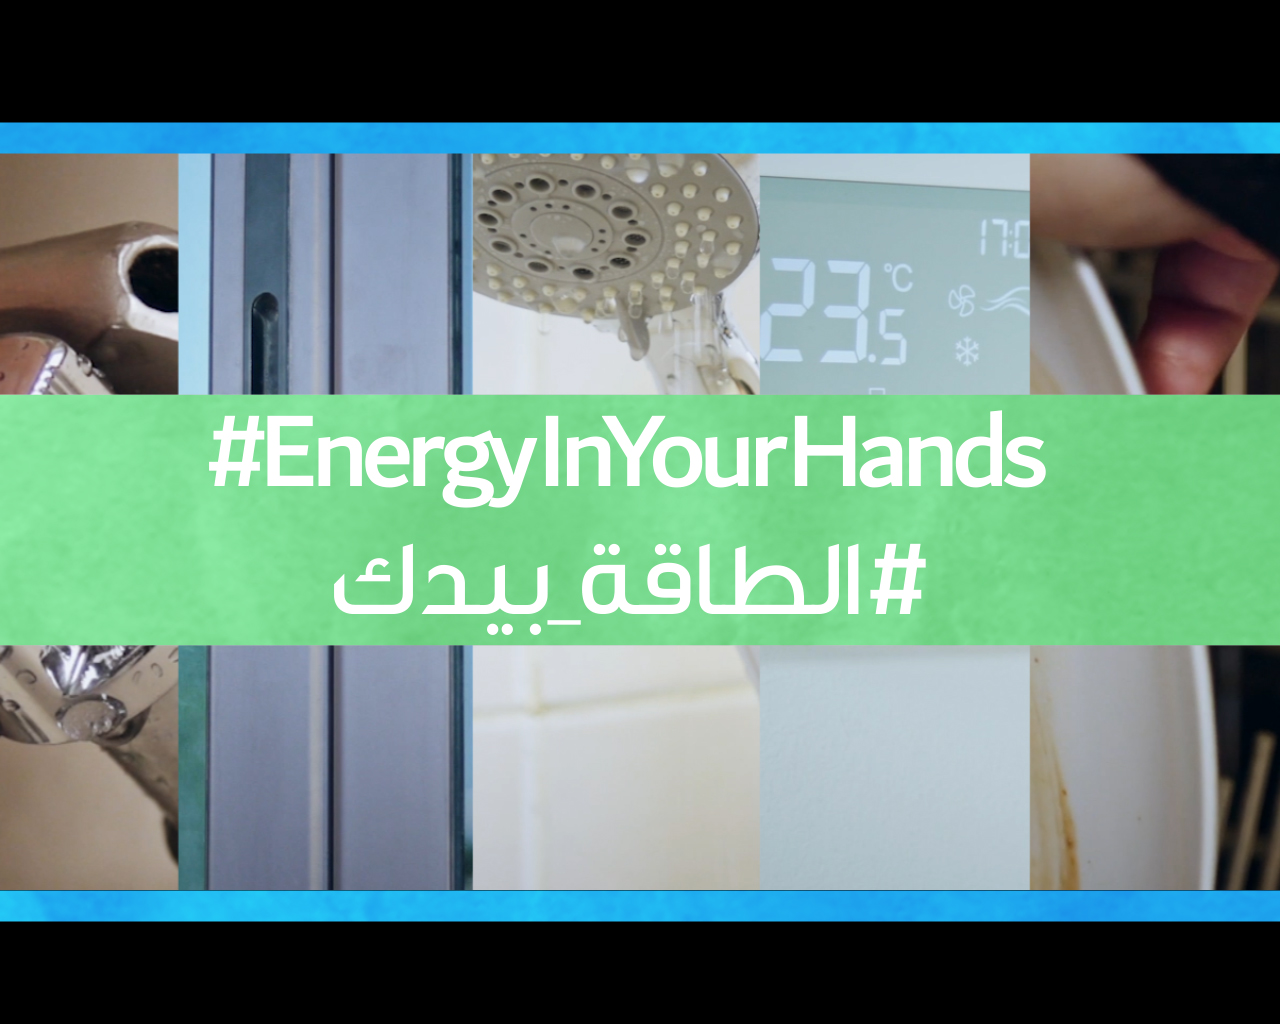 Energy In Your Hands Campaign